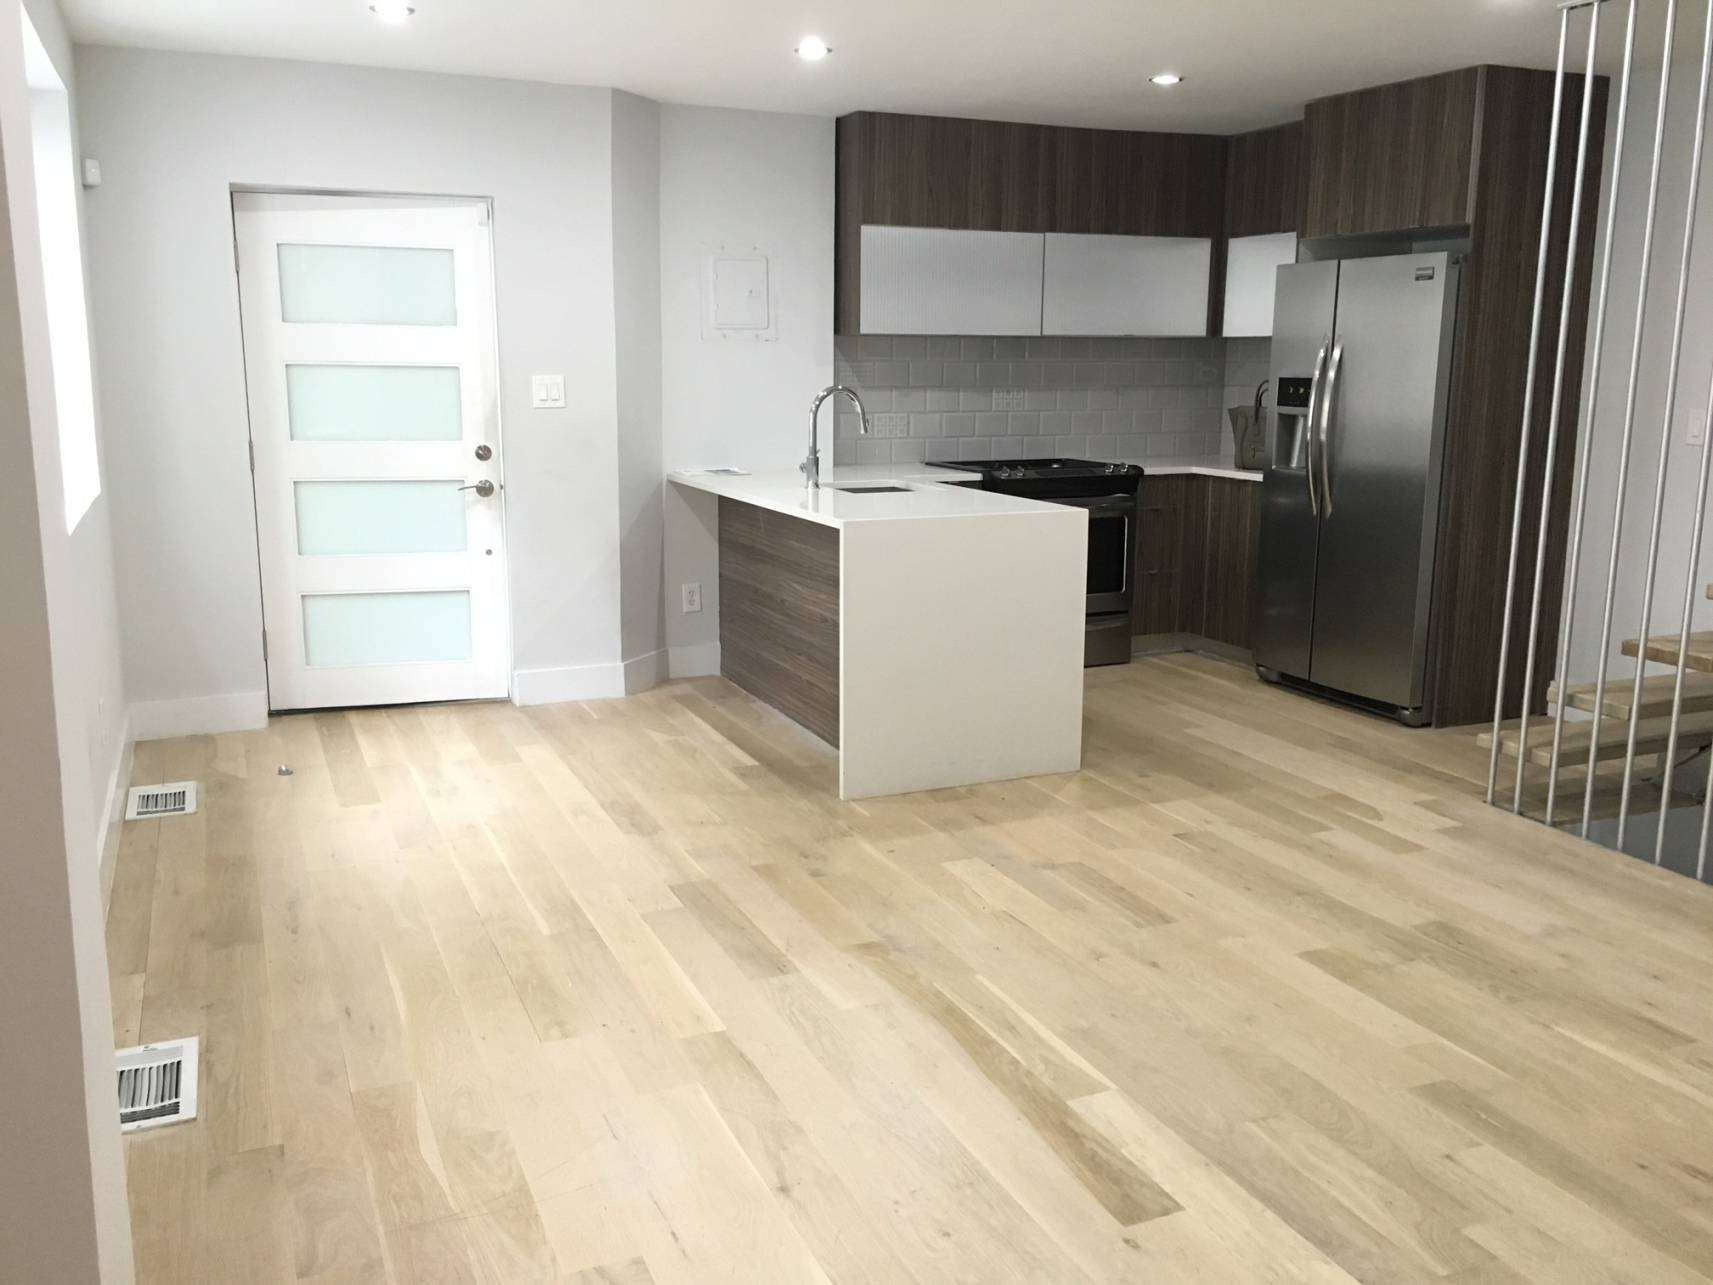 Fully renovated and located in the heart of bustling Crown Heights, this 3 bedroom, 3 bathroom apartment is a place to call home.